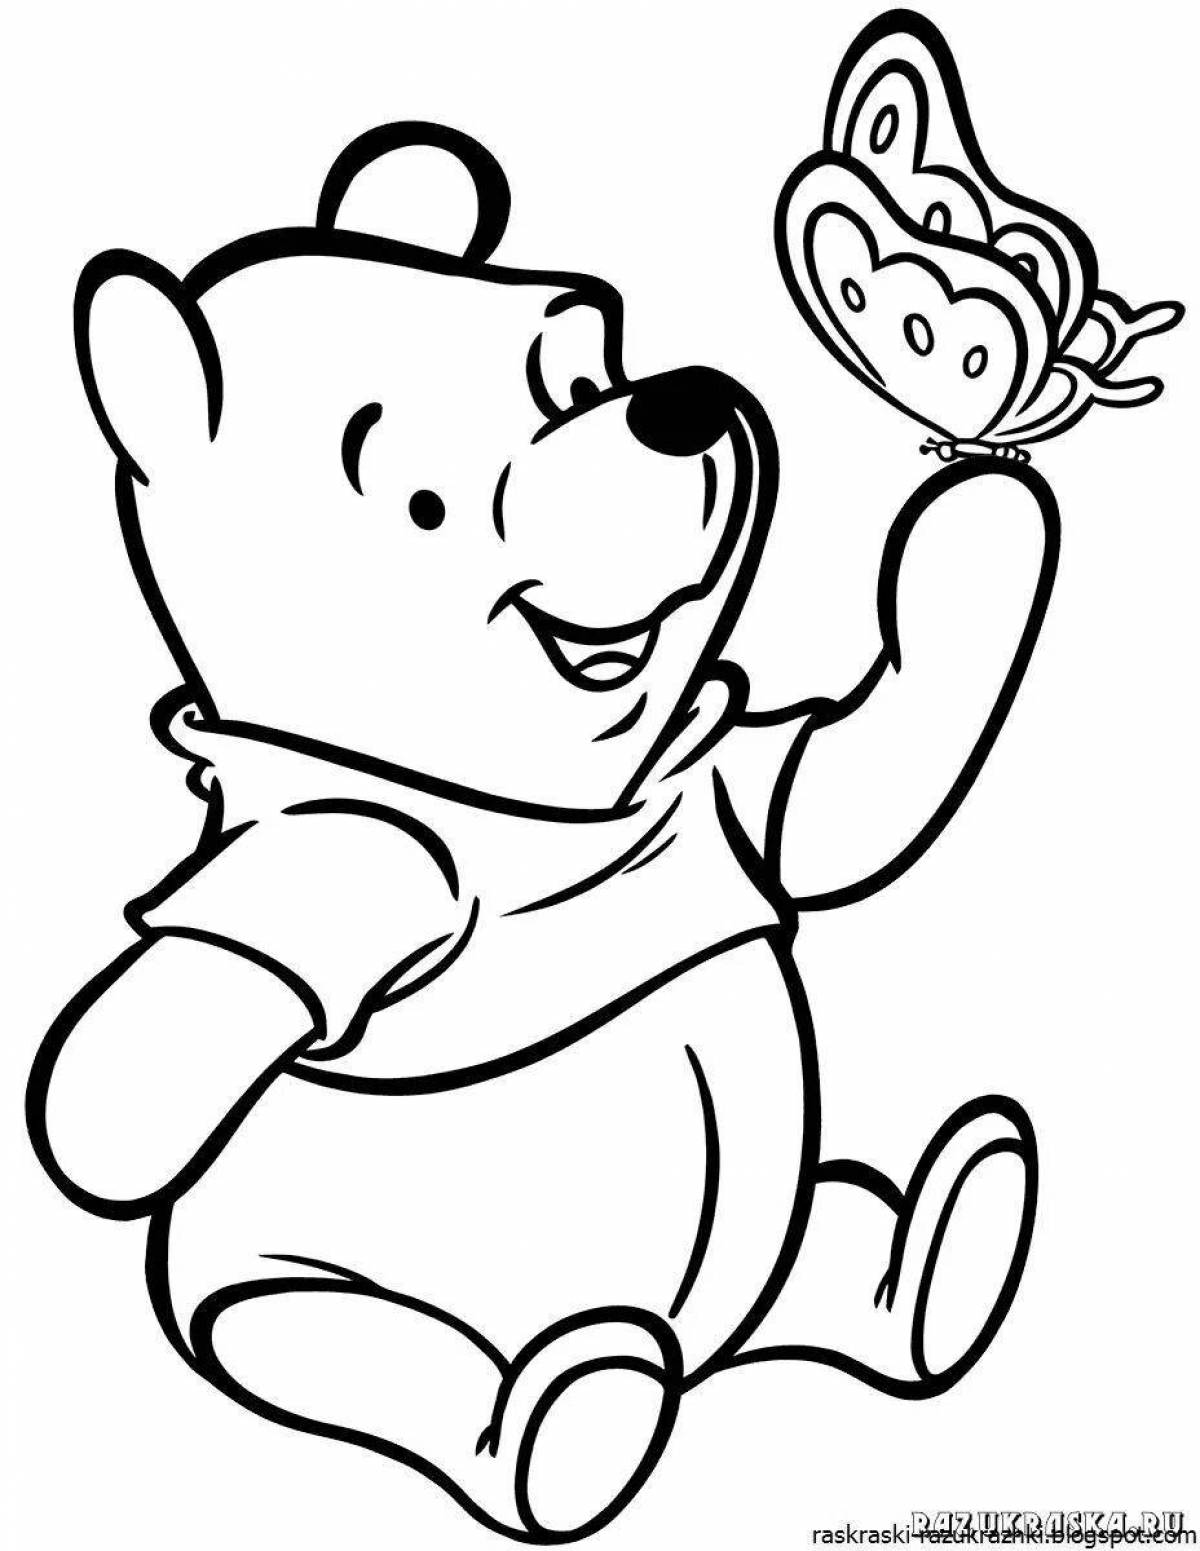 Gorgeous winnie the pooh coloring book